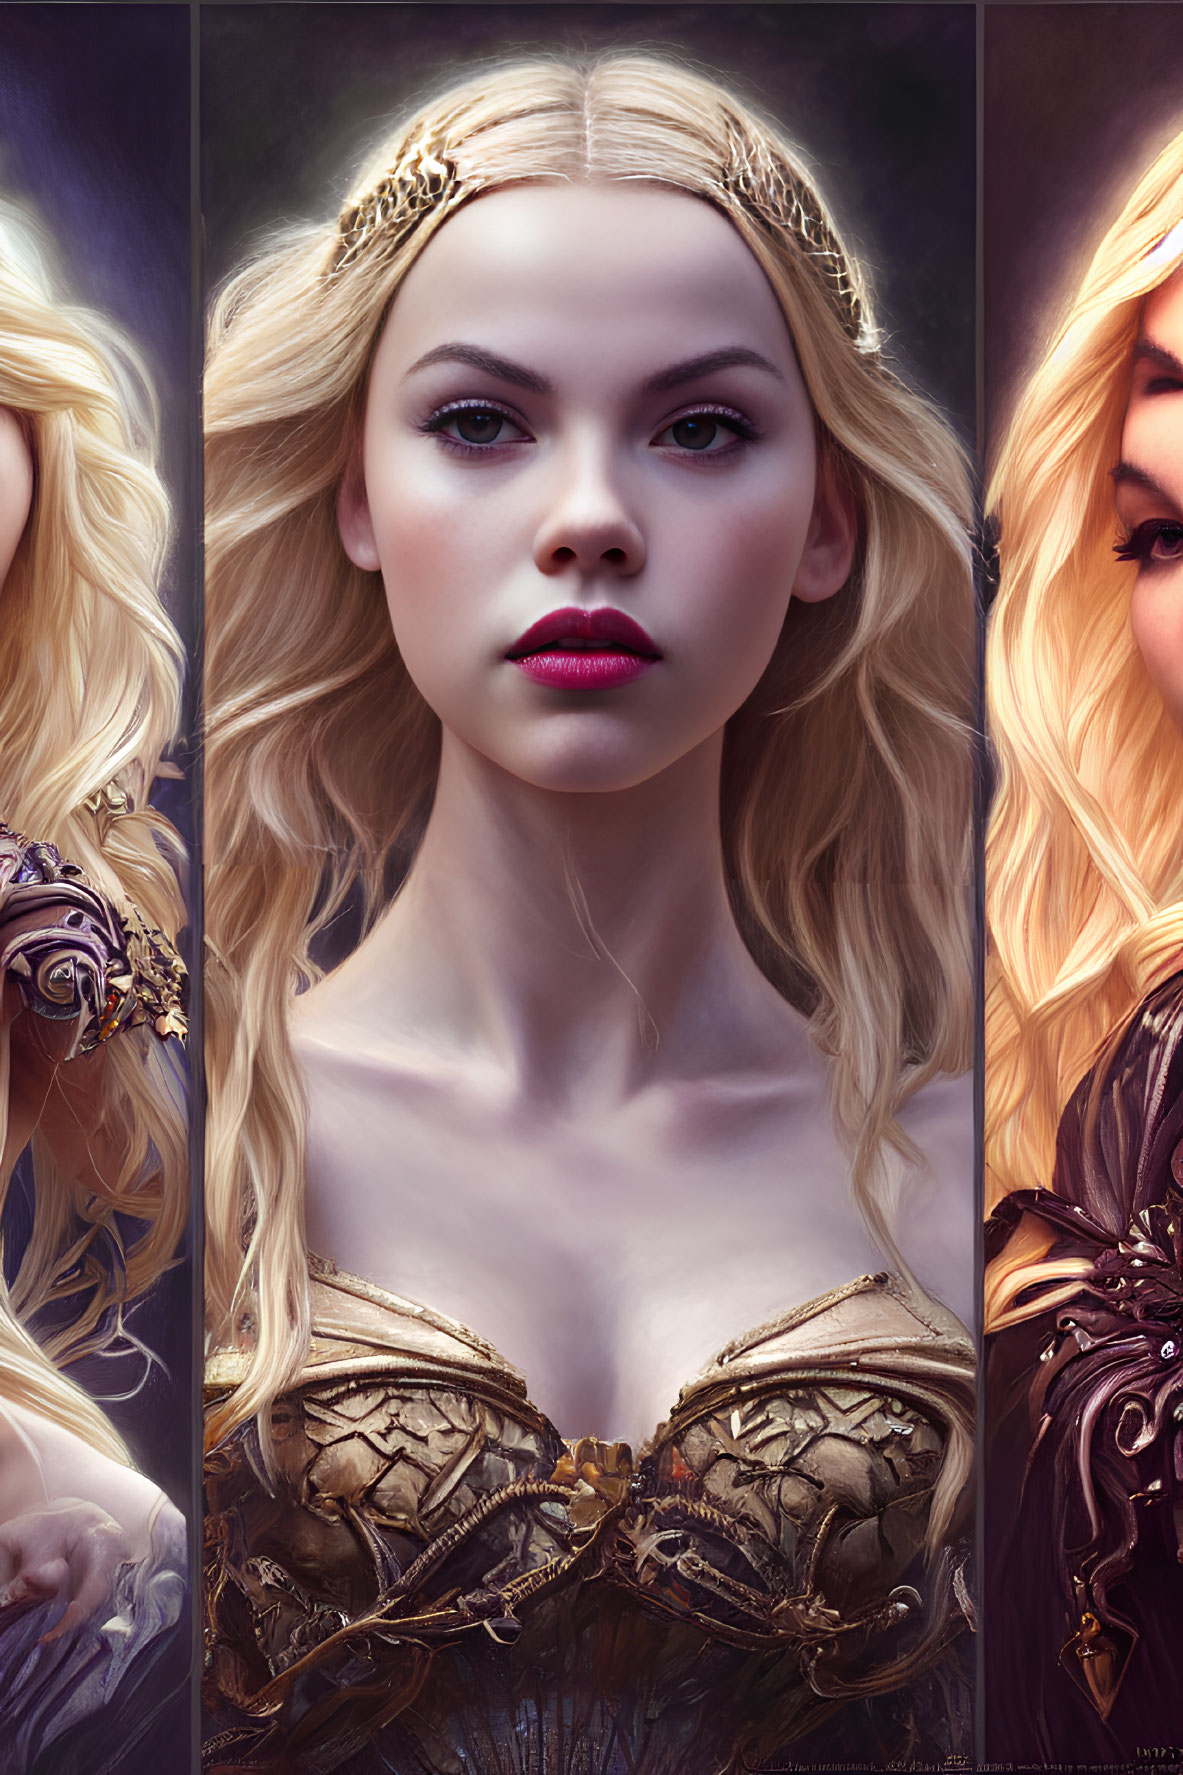 Blonde Woman with Braided Crown and Golden Armor Bodice Artwork